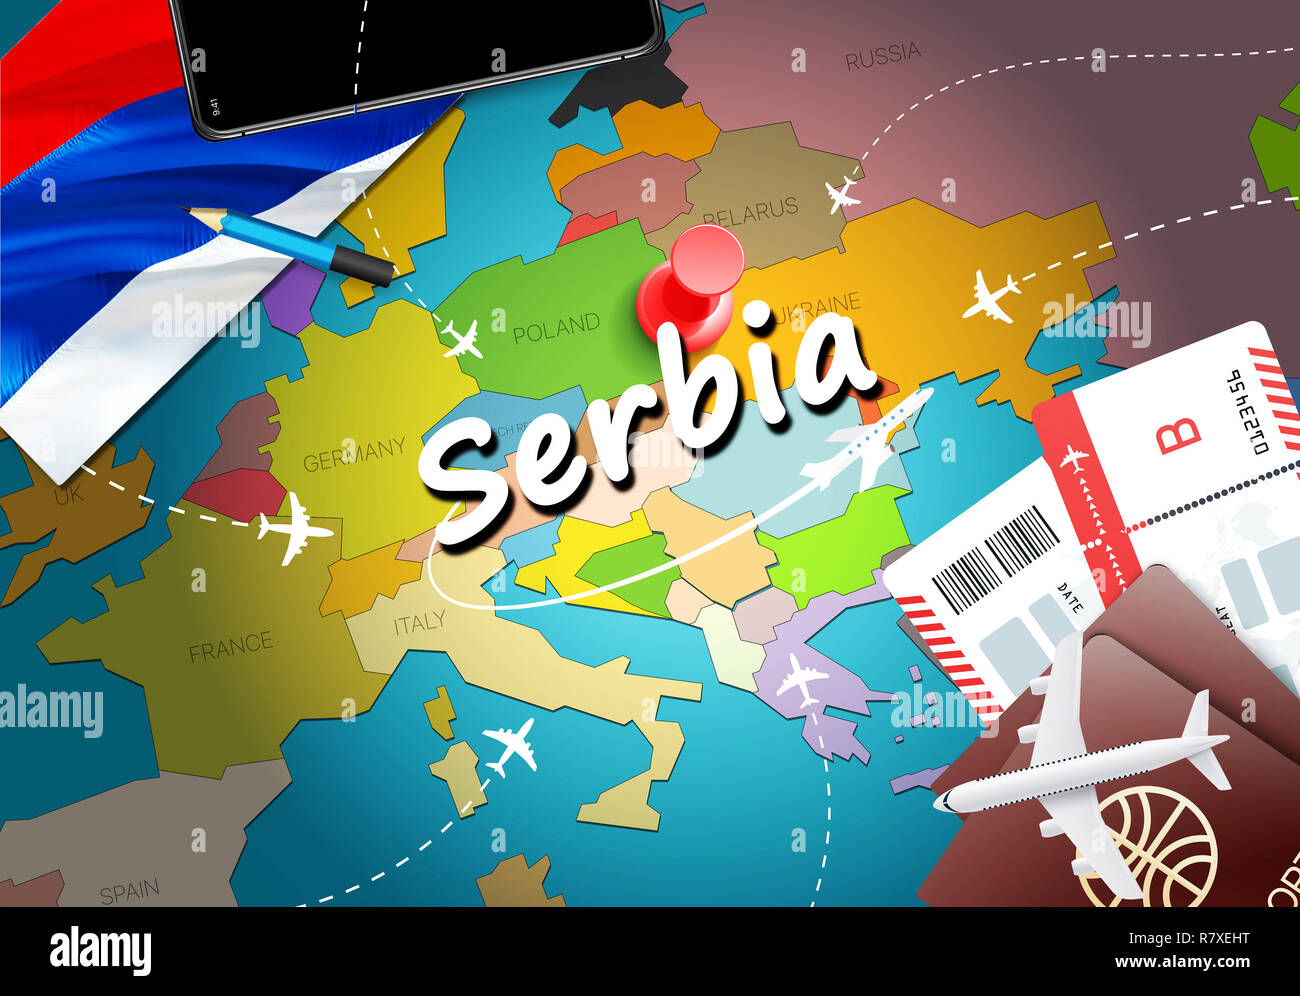 Serbia travel concept map background with planes,tickets. Visit Serbia travel and tourism destination concept. Serbia flag on map. Planes and flights  Stock Photo